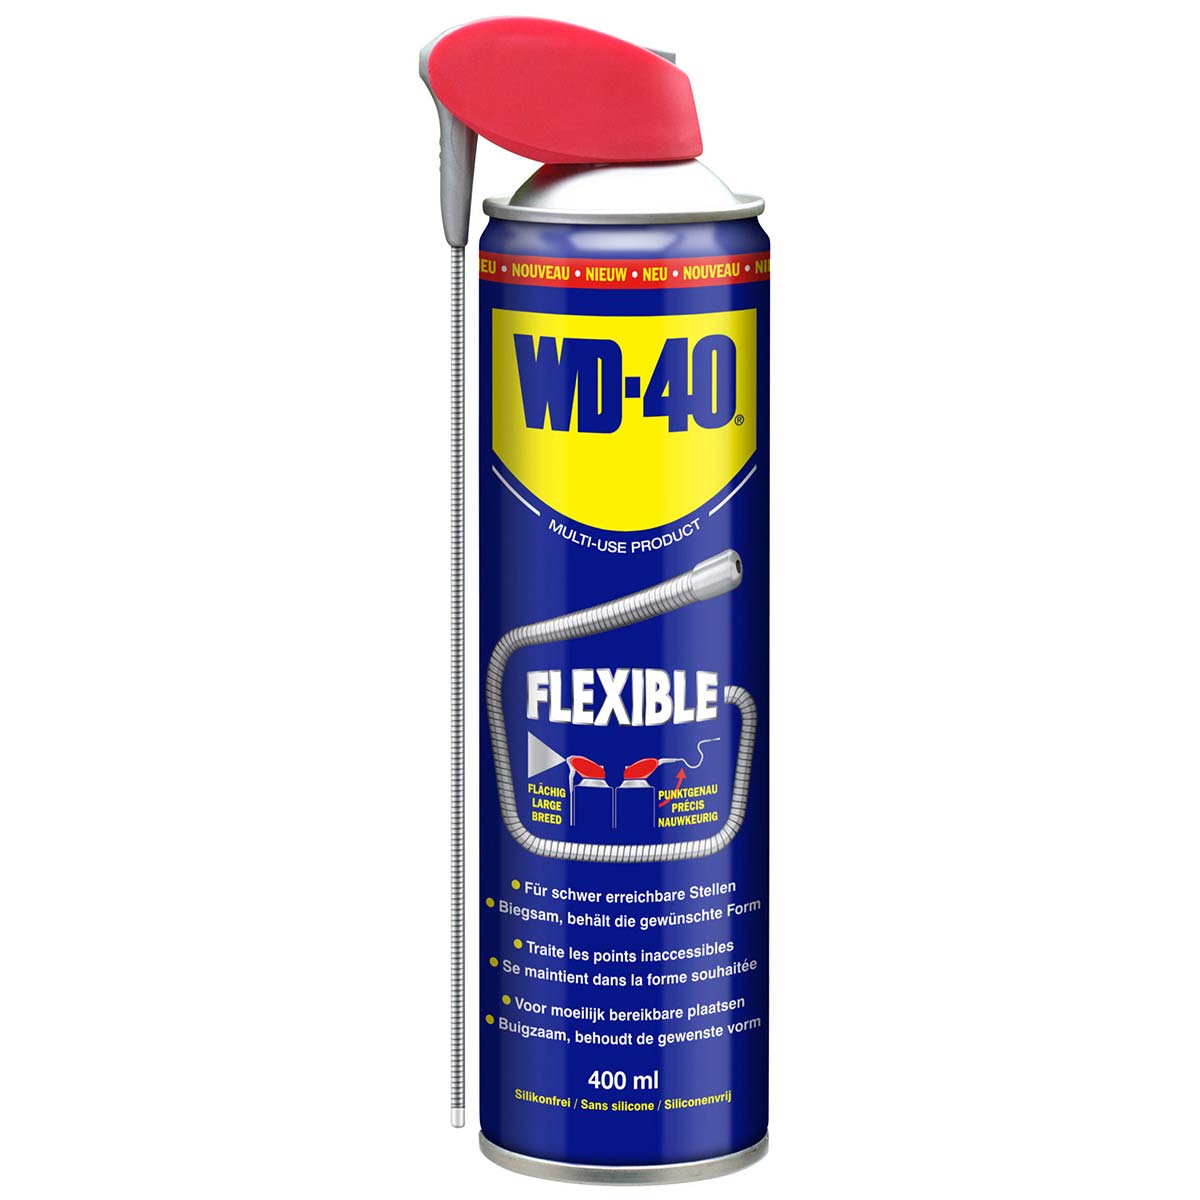 WD-40 multifunctional product